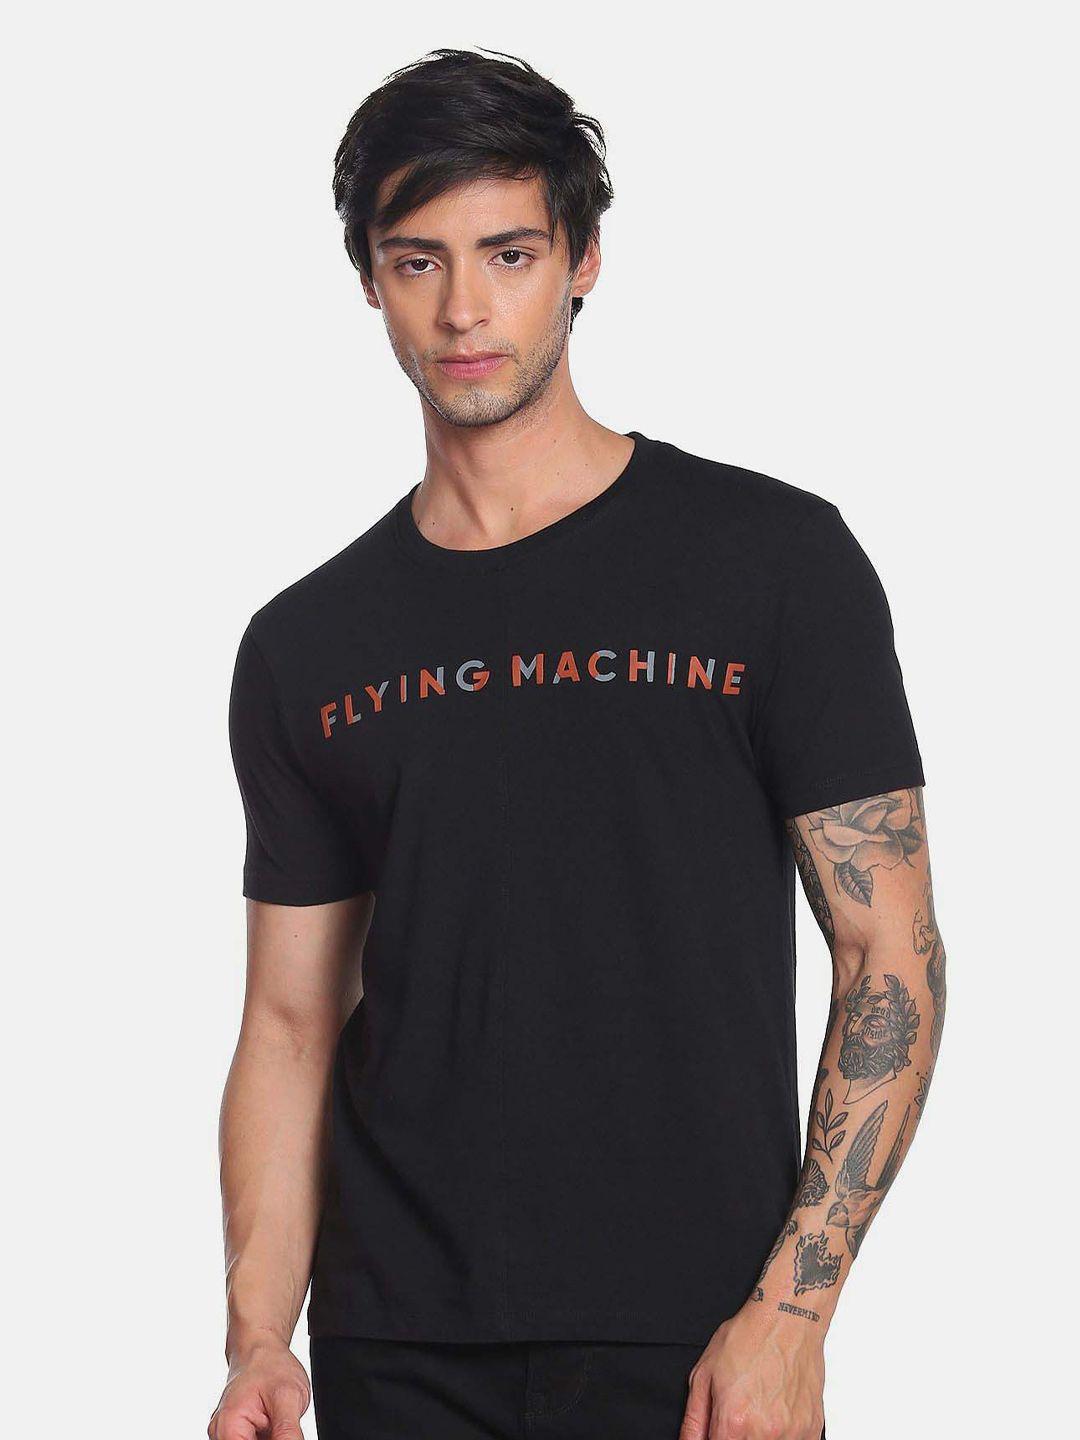 flying-machine-men-typography-printed-slim-fit-pure-cotton-t-shirt